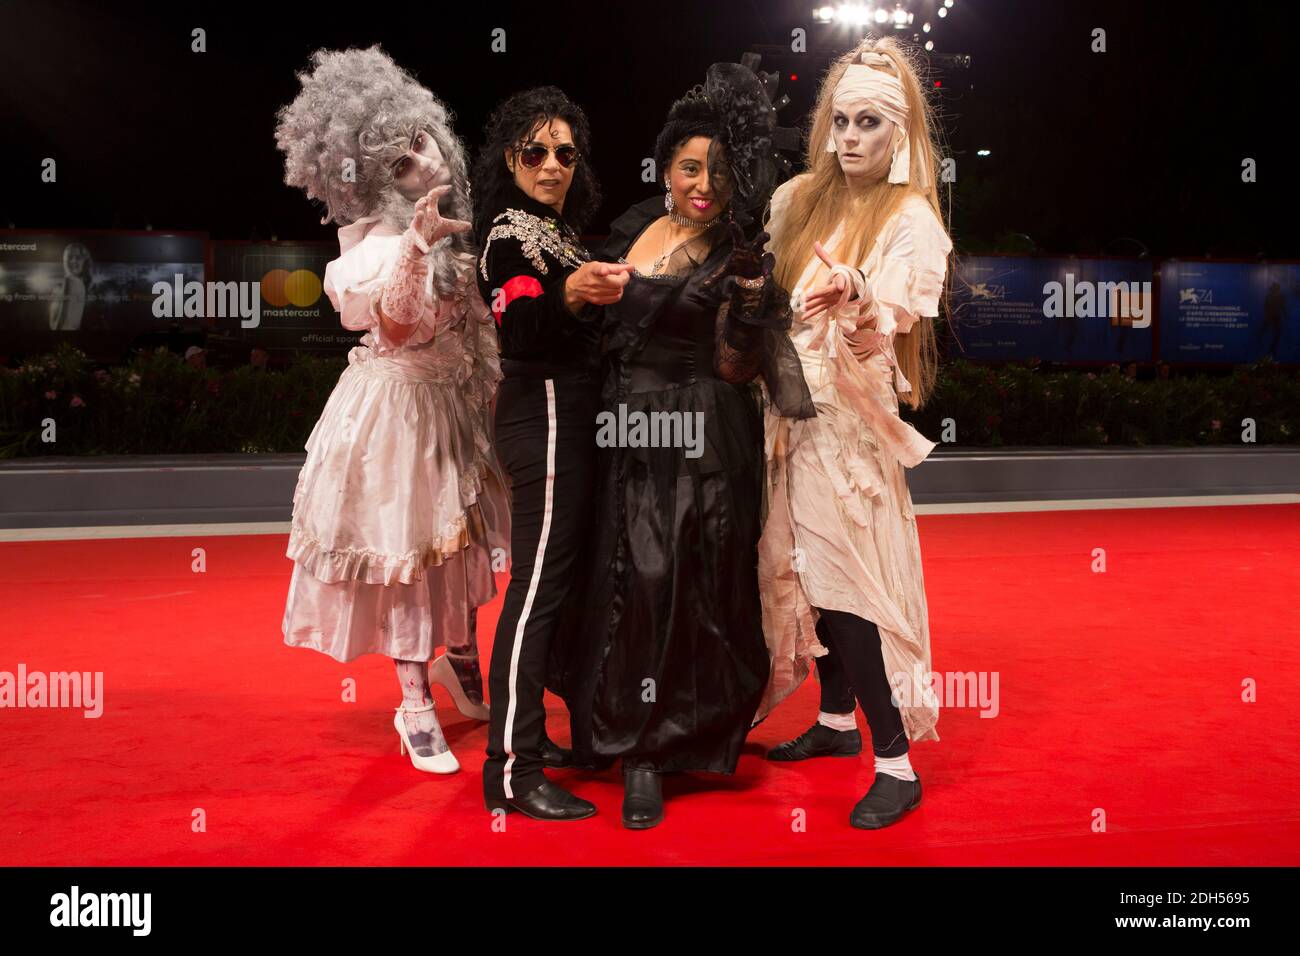 Guests arriving for the premiere of Michael Jackson's Thriller 3D as part of the 74th Venice International Film Festival (Mostra) in Venice, Italy, on September 4, 2017. Photo by Marco Piovanotto/ABACAPRESS.COM Stock Photo